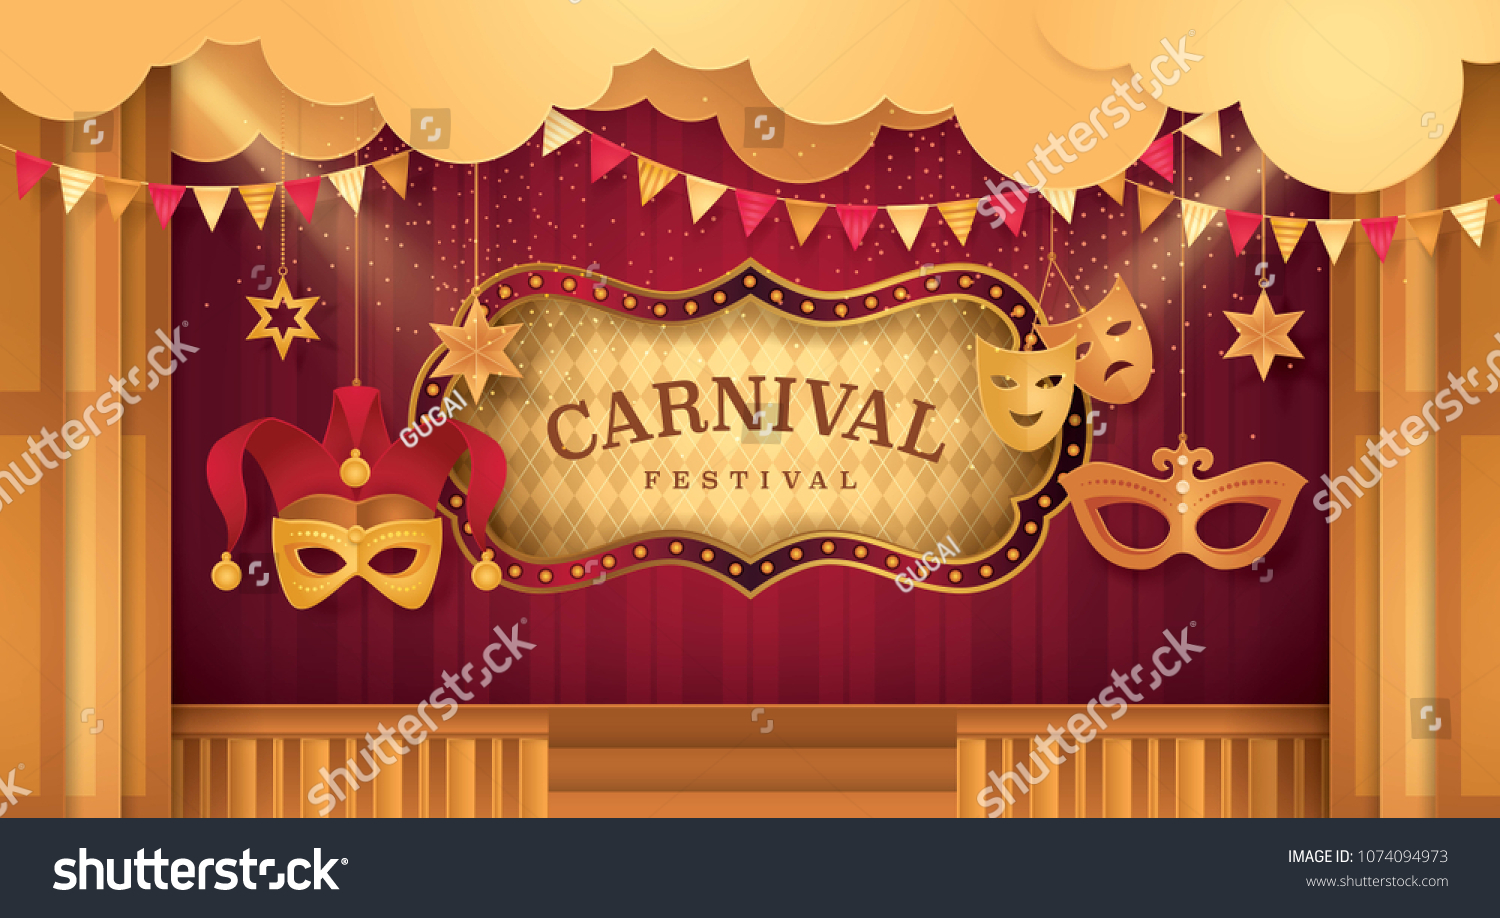 SVG of Gold Curtains stage with Circus Frame Border, Cloud and Hanging Carnival Mask, Venetian Jester mask, Triangle bunting flags, Fun Fair, Day Scene festival, Theme Theater, Paper art vector illustration svg